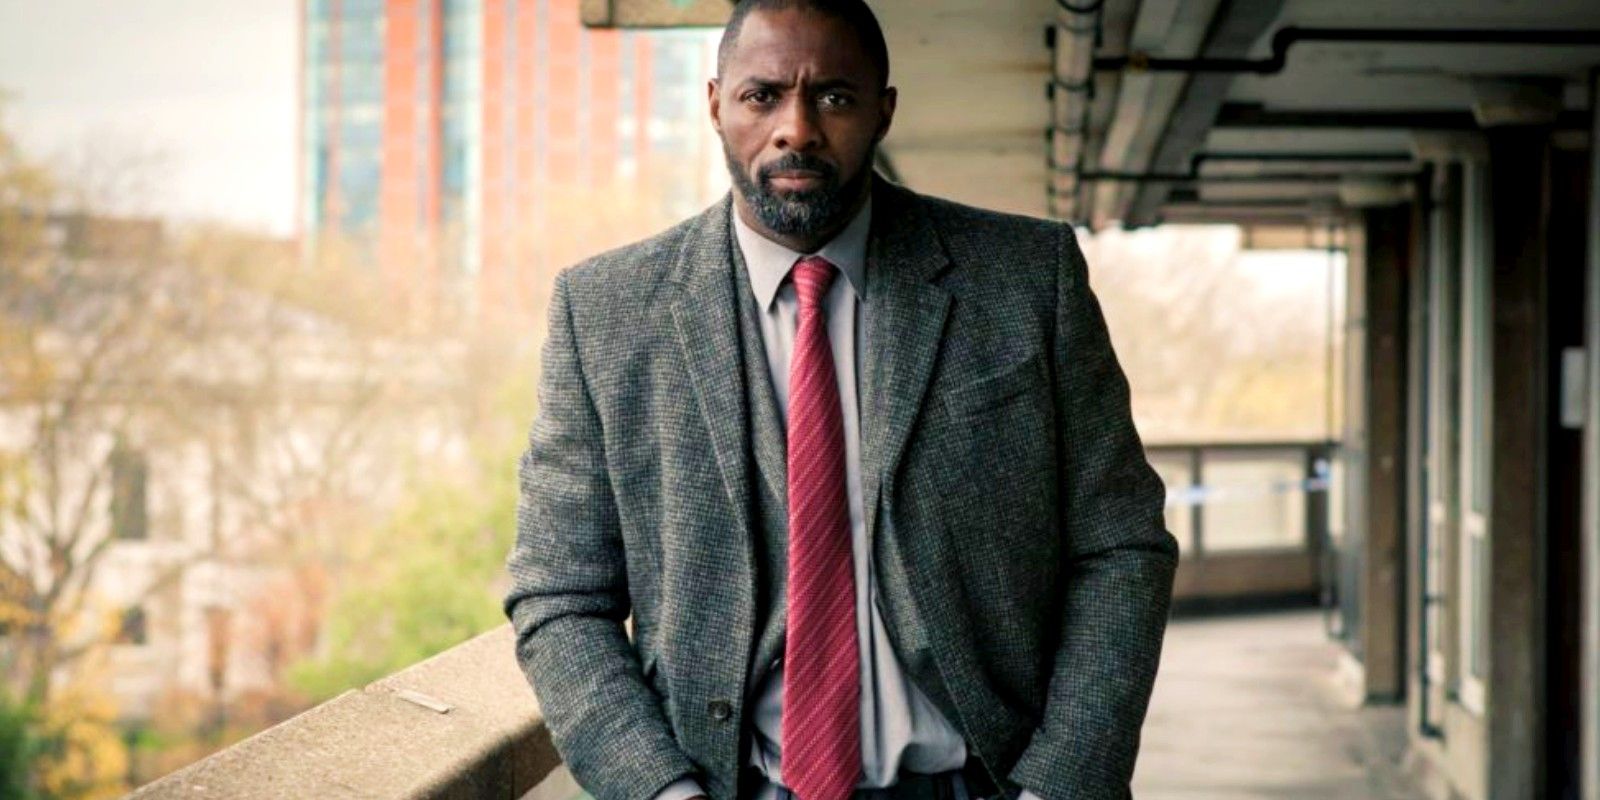 Idris Elba Says He Is Not Going to Play James Bond